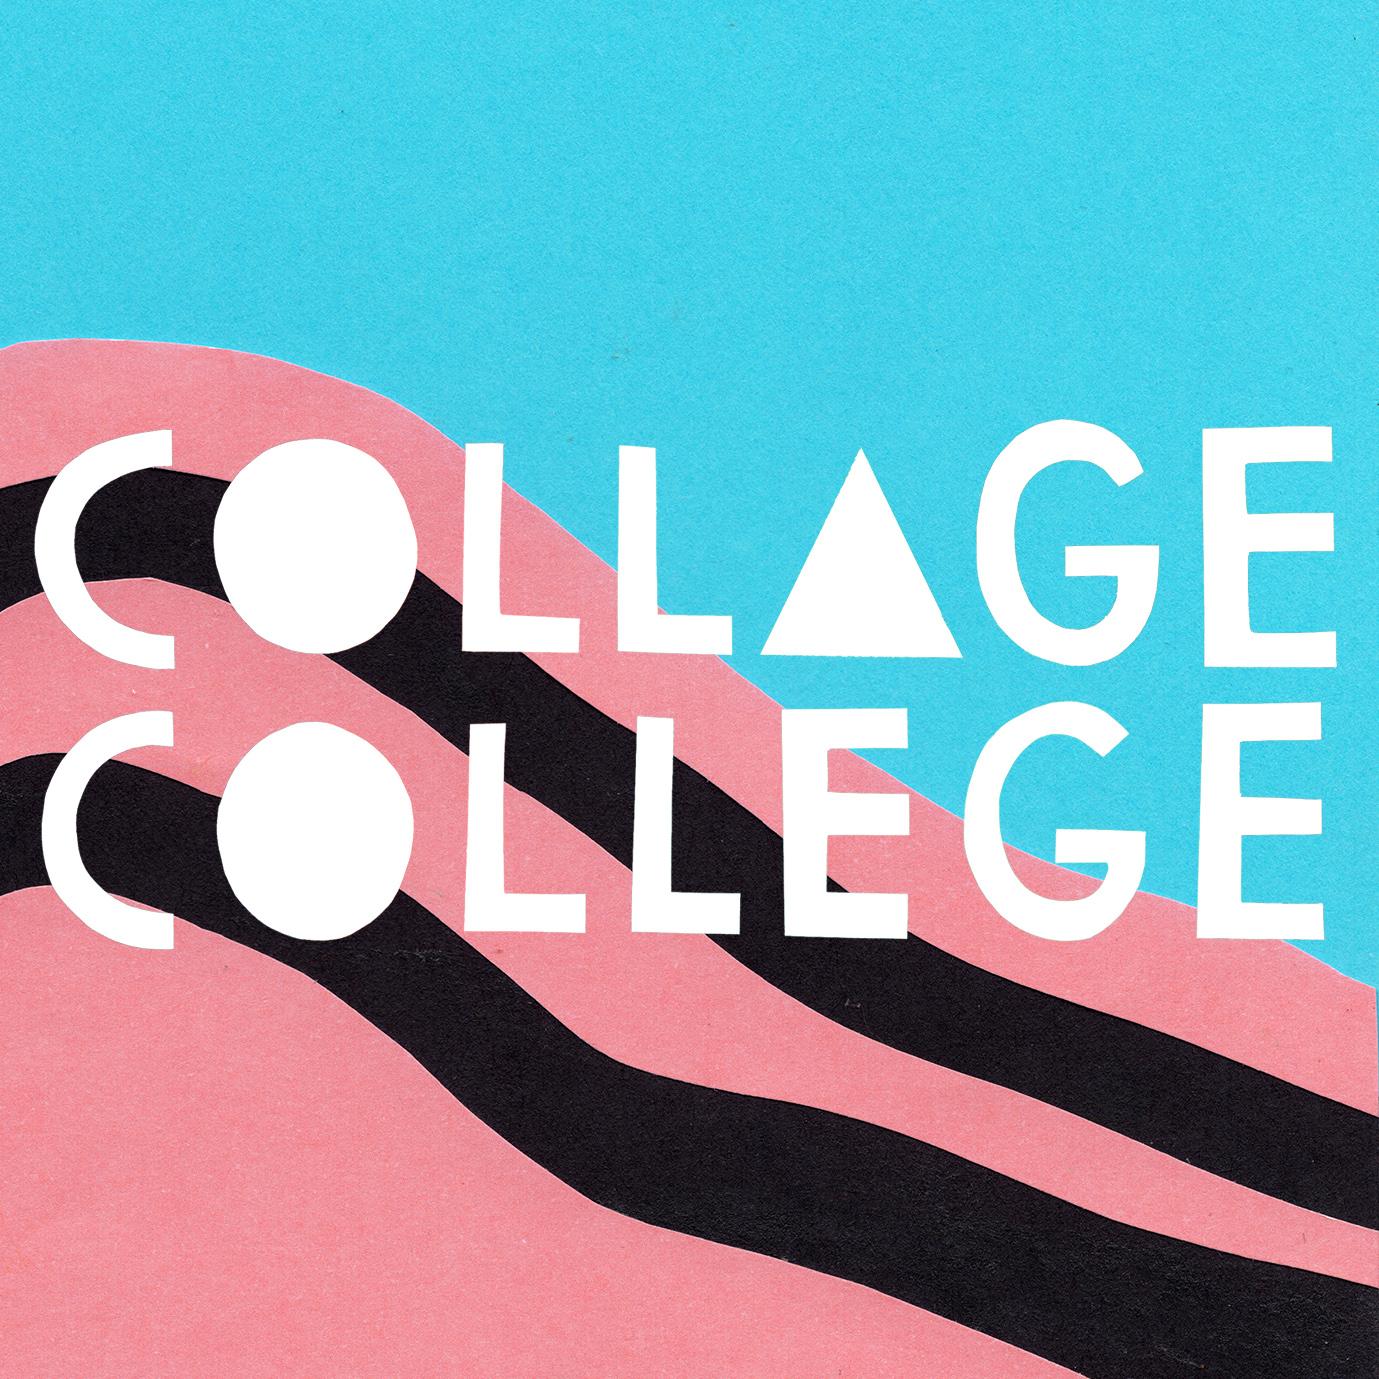 Collage College